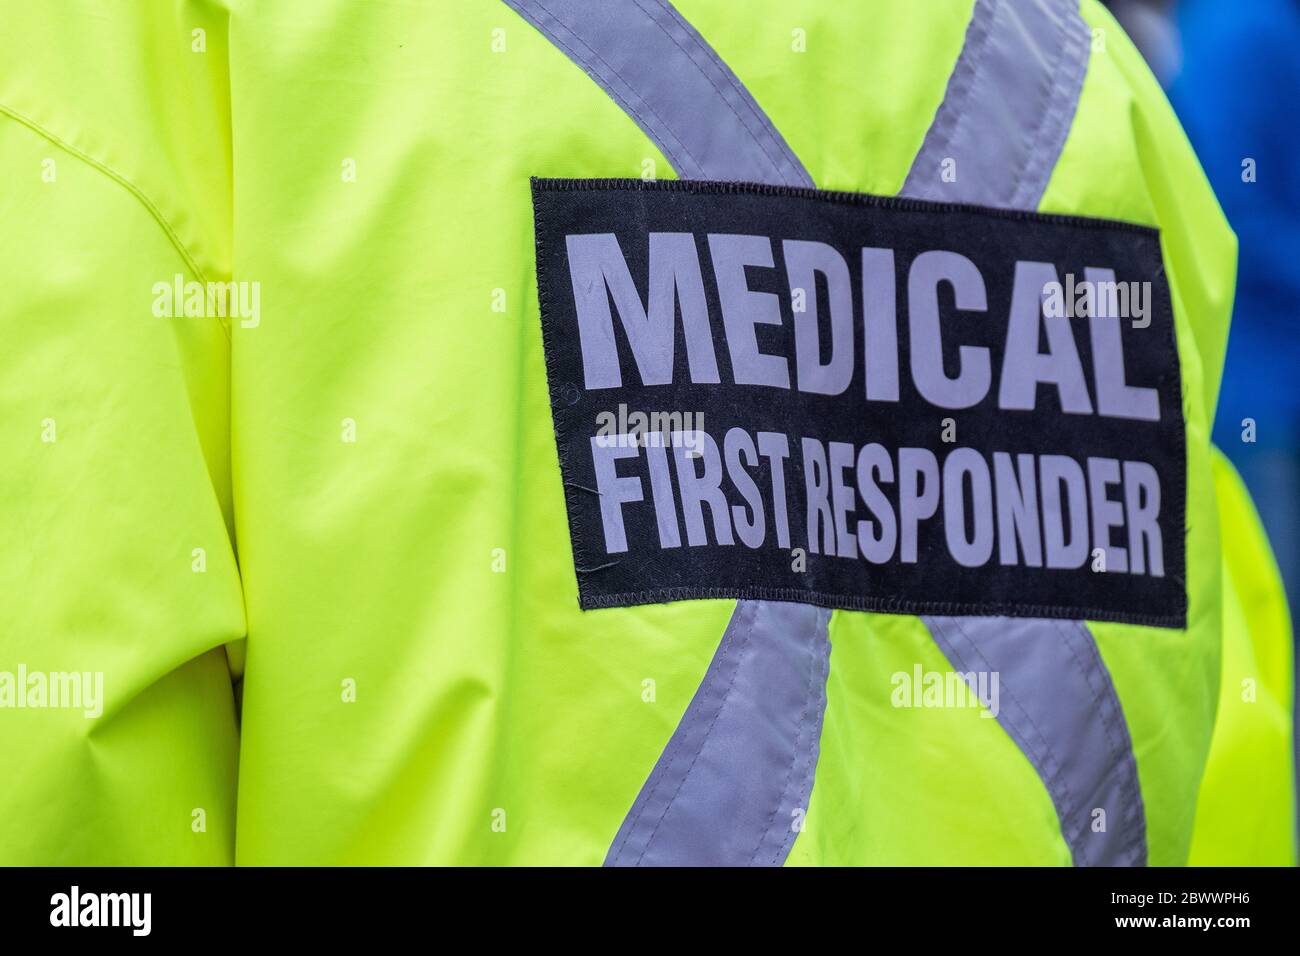 A bright yellow medical first responder uniform being worn by a large male in a crowded street.The coat has a grey reflective cross across the back. Stock Photo